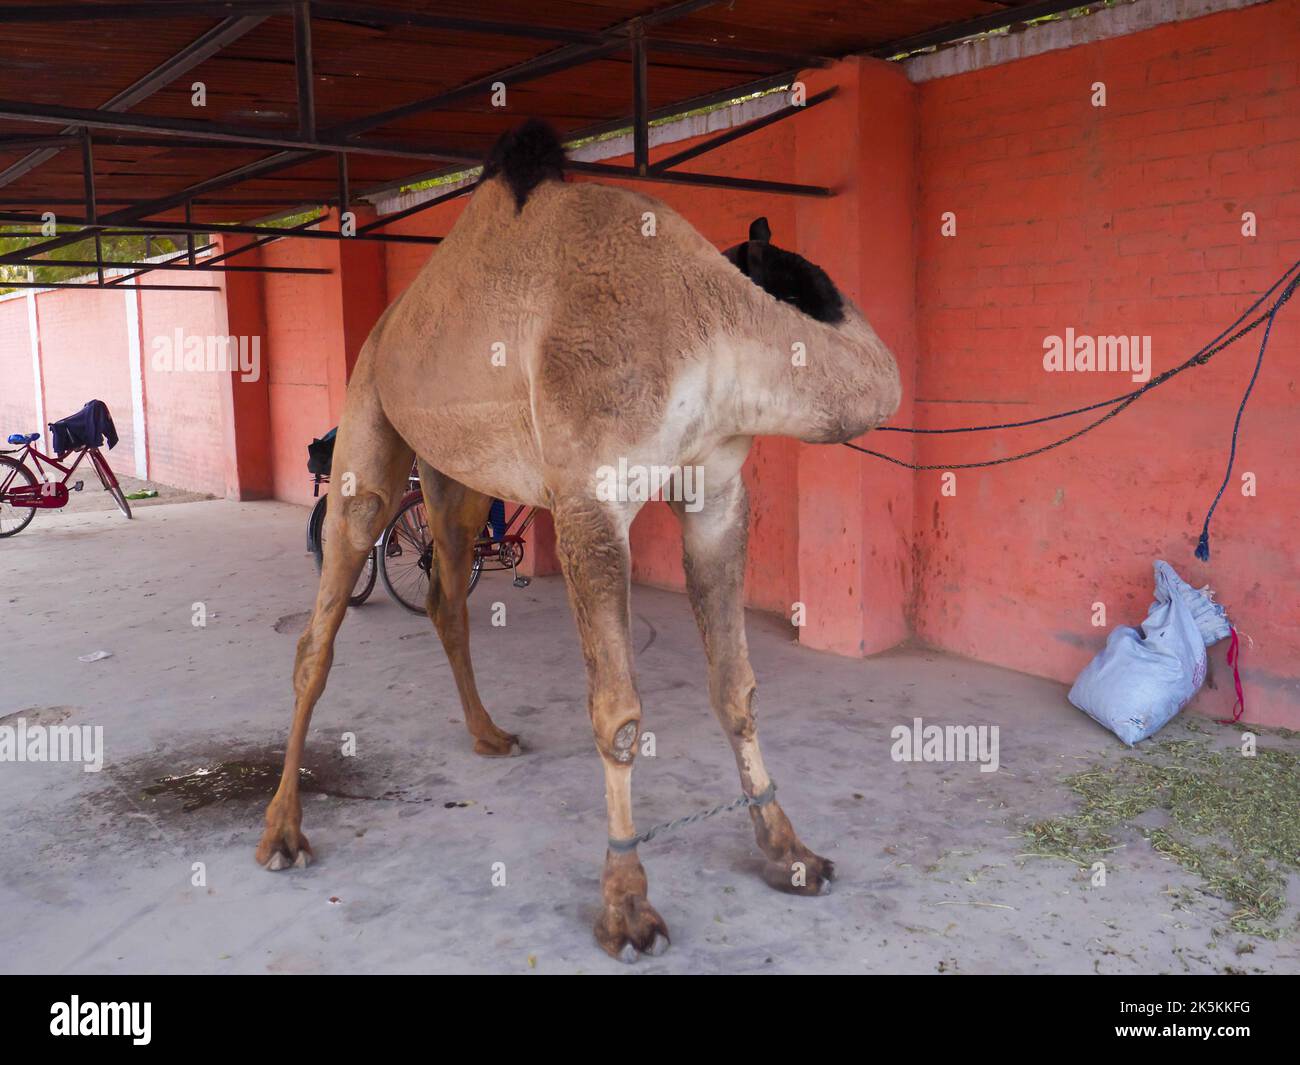 Camel tied by rope in Parking shed. Camel standing and resting in parking space. Stock Photo